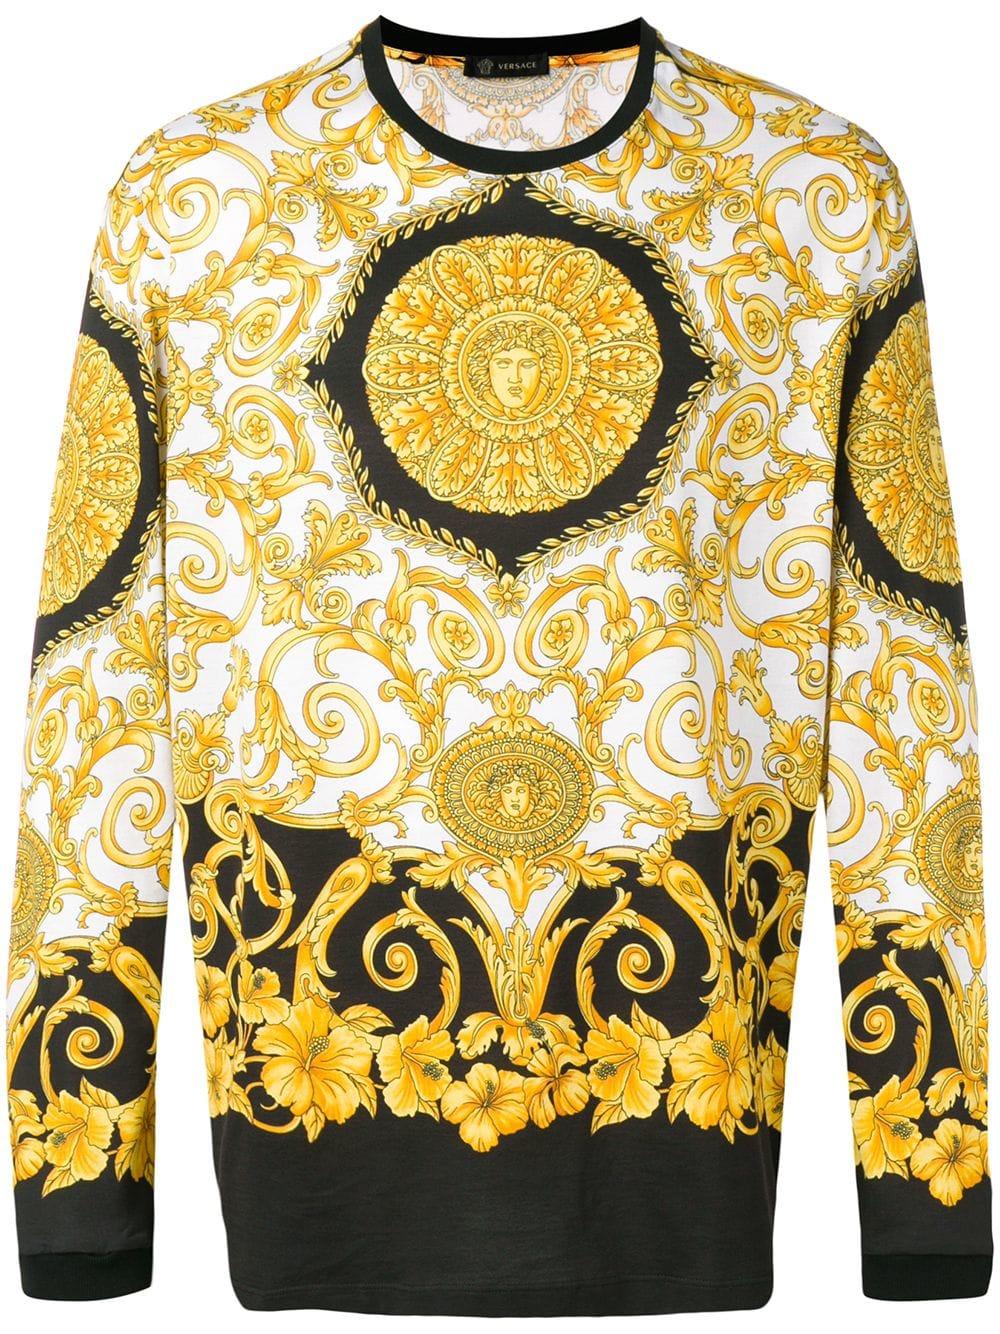 Versace Cotton Hibiscus Print Long-sleeve T-shirt in Yellow for Men - Lyst